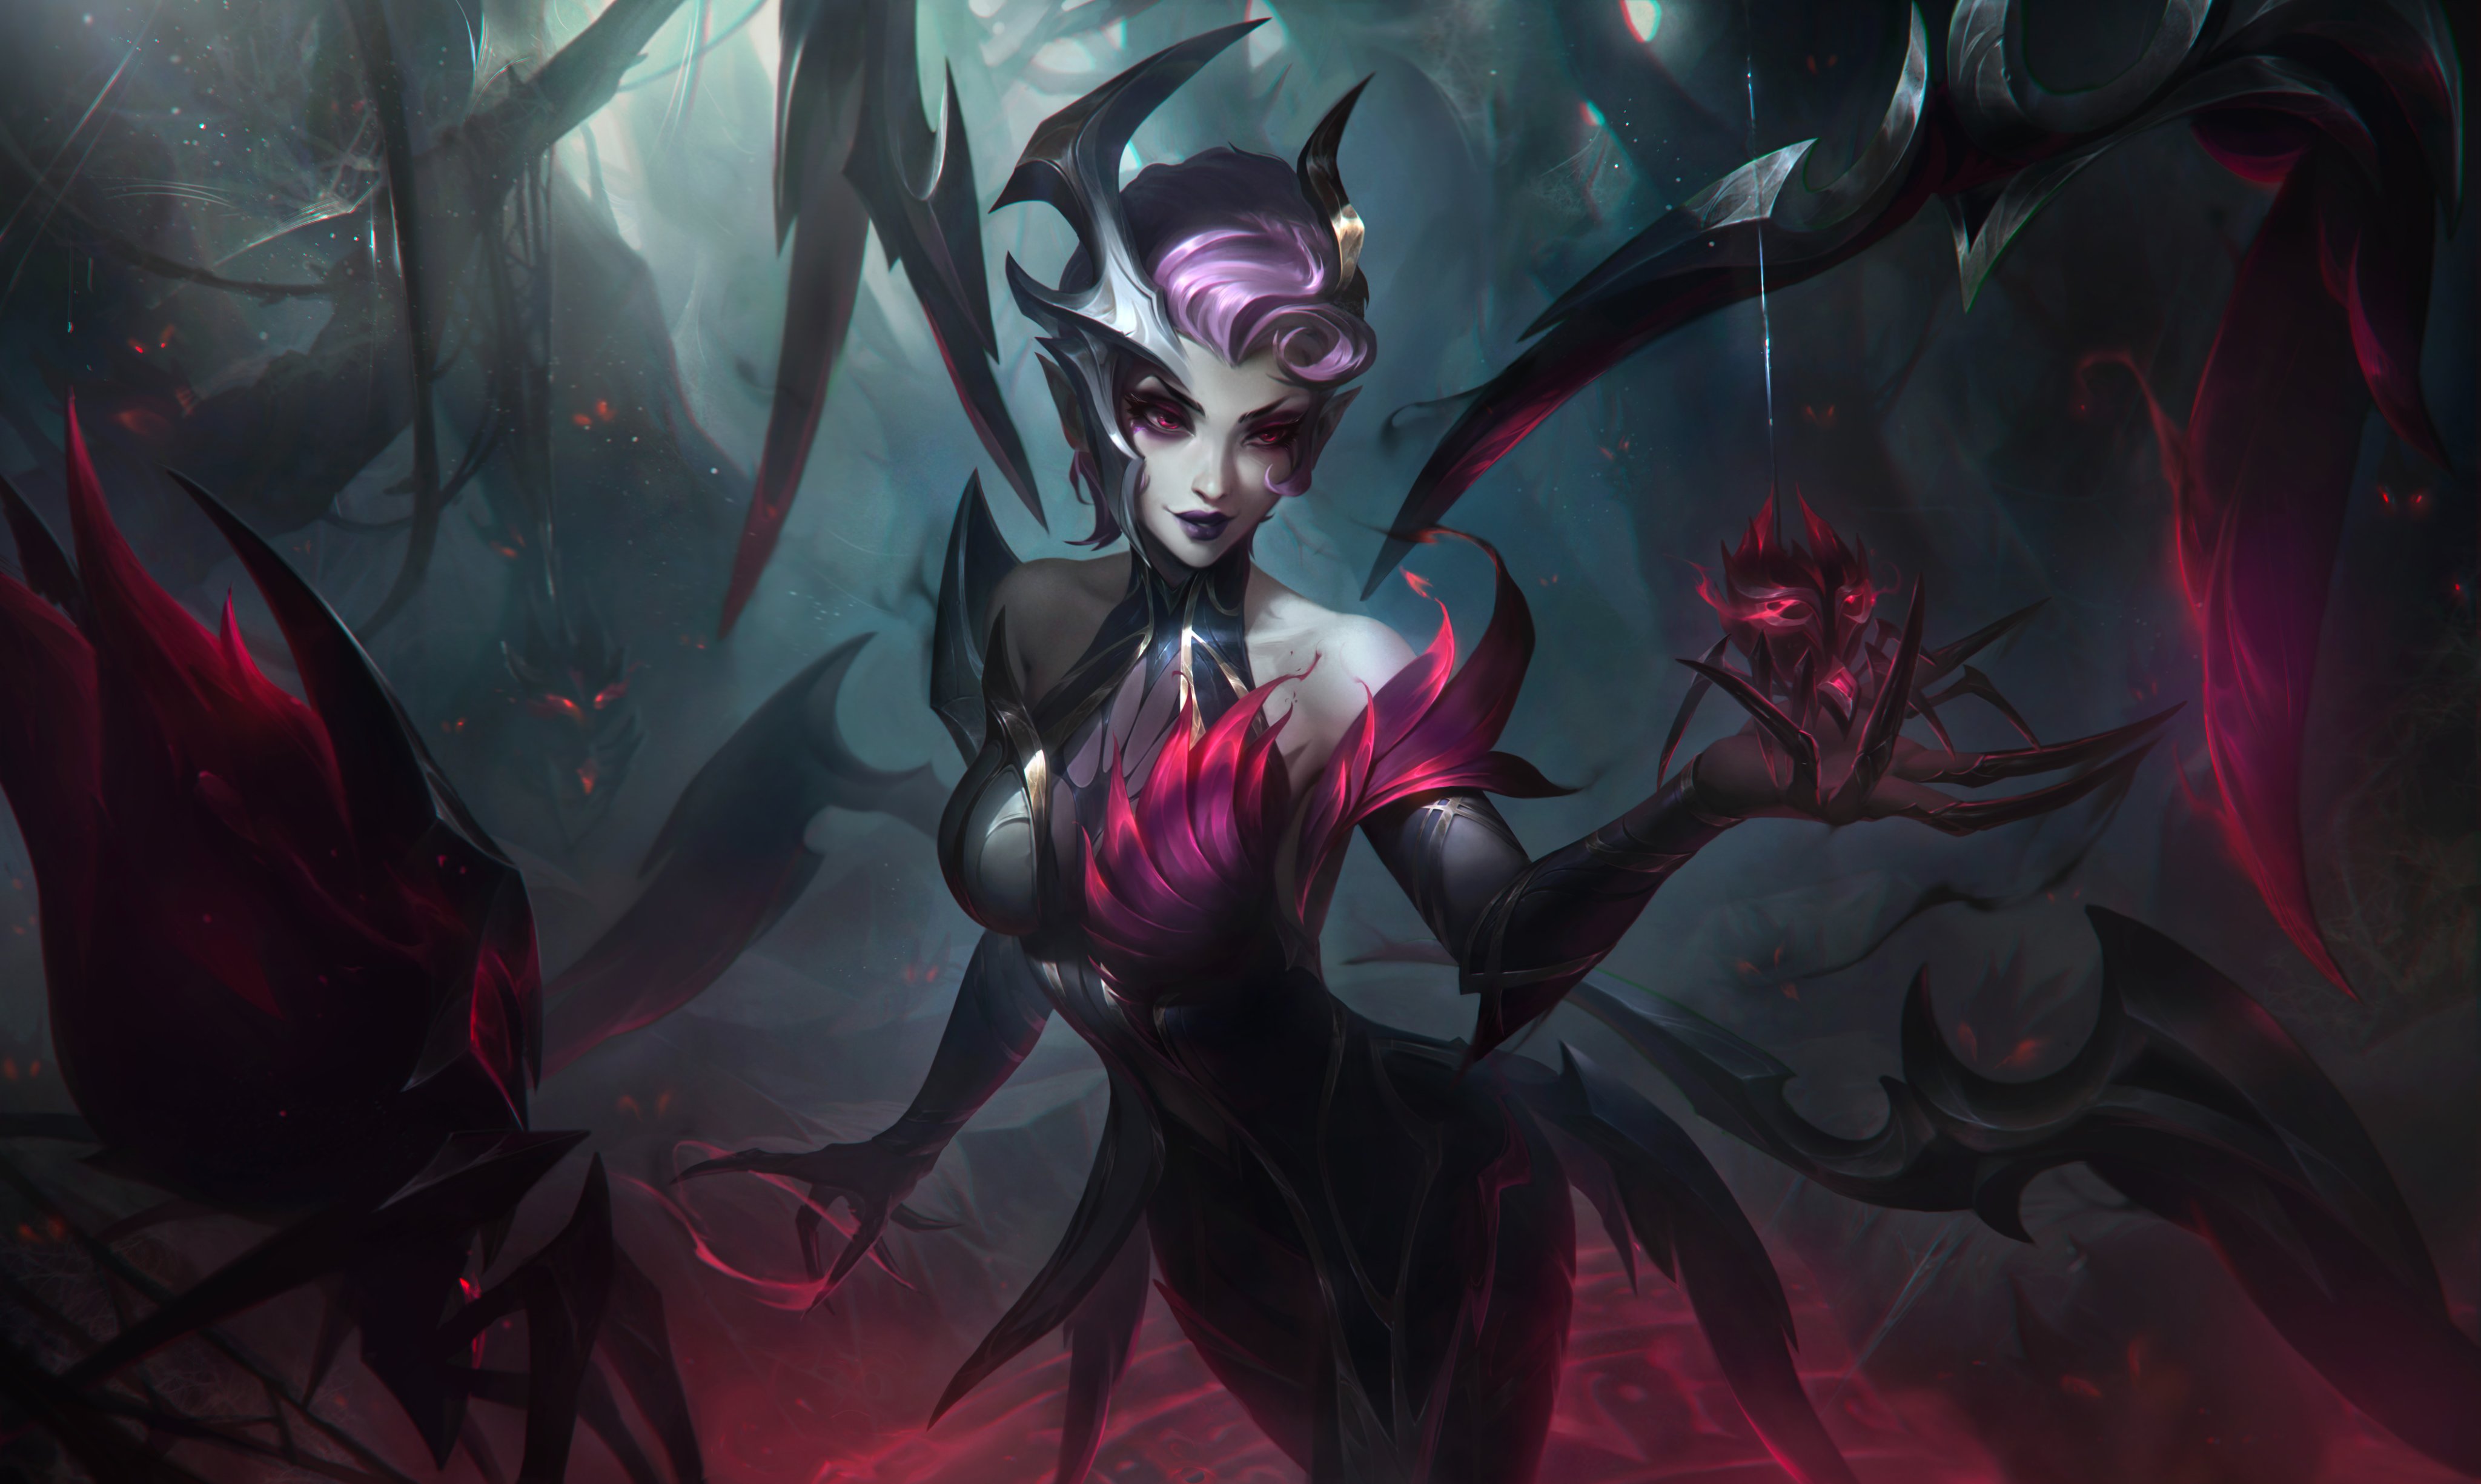 League of Legends Elise wallpaper Resolution 4096x2450 | Best Download this awesome wallpaper - Cool Wallpaper HD - CoolWallpaper-HD.com